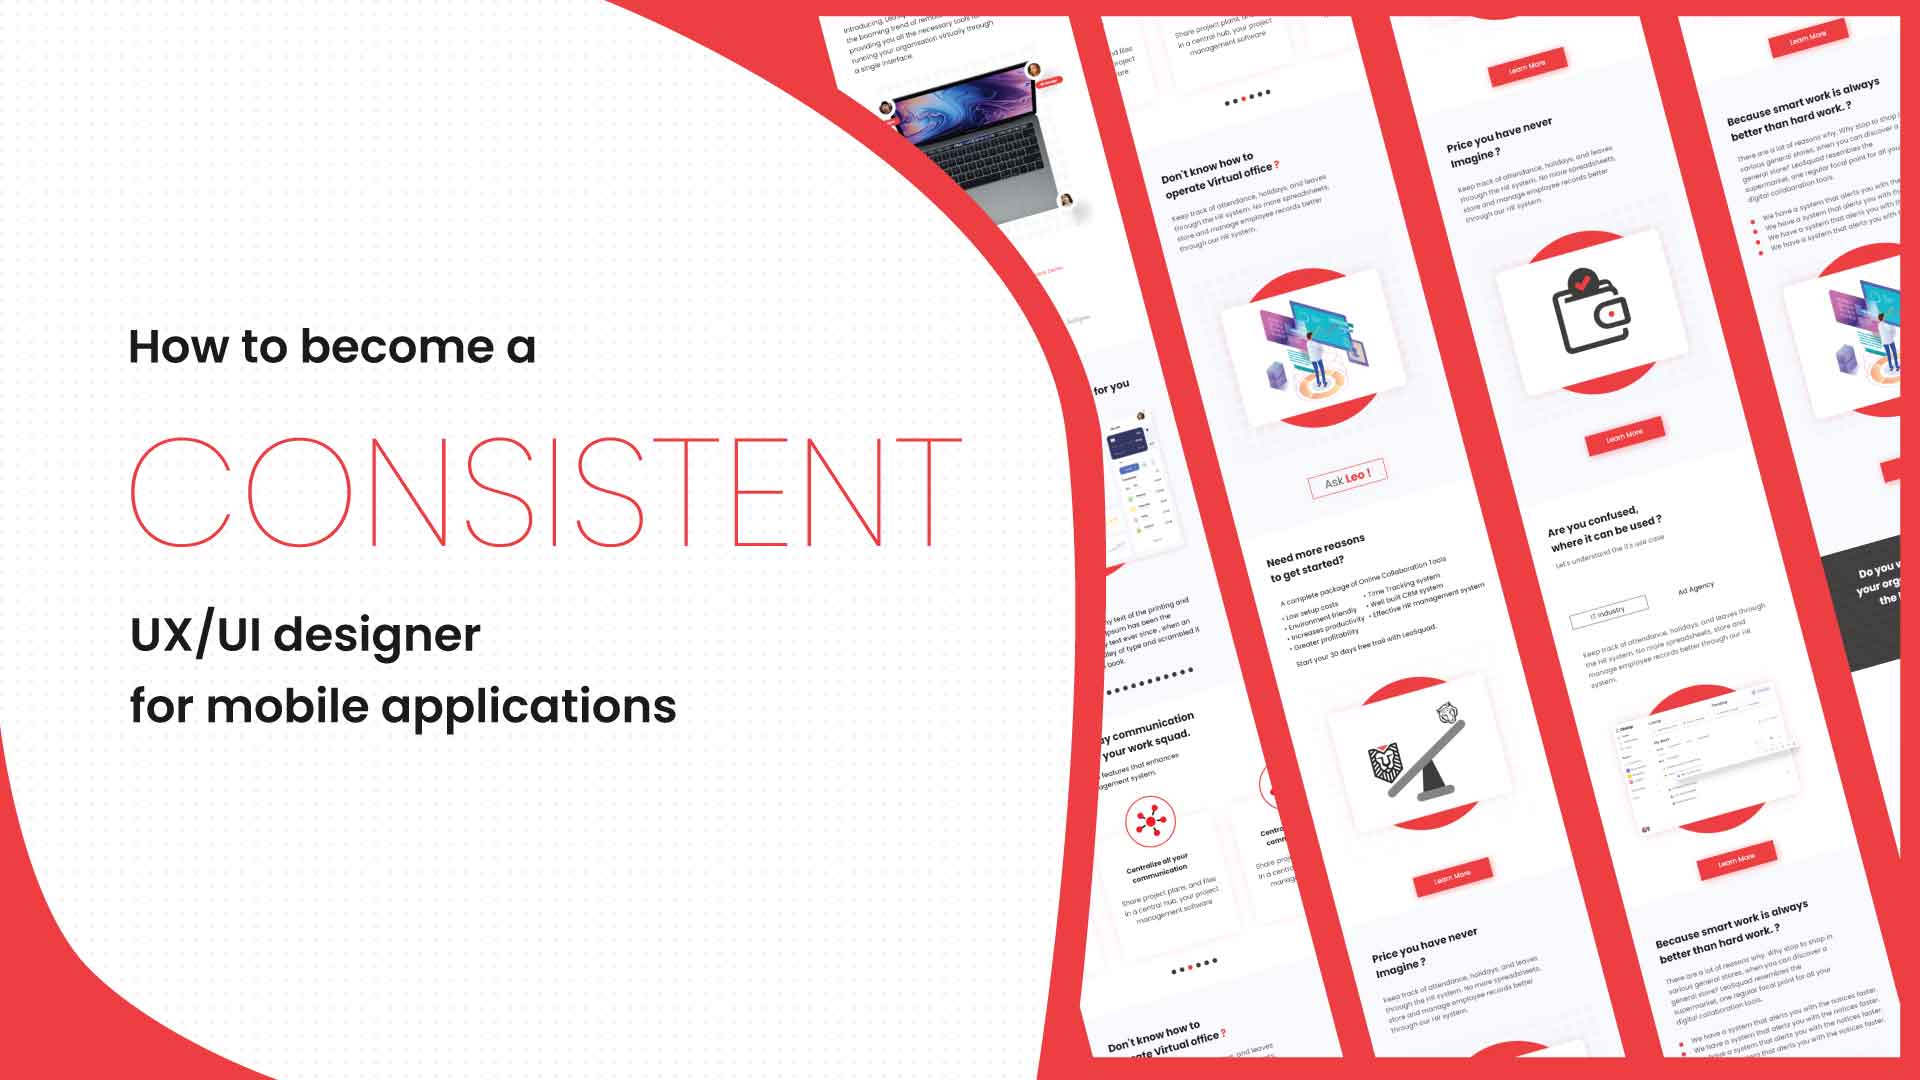 How to become a consistent UX/UI designer for mobile applications